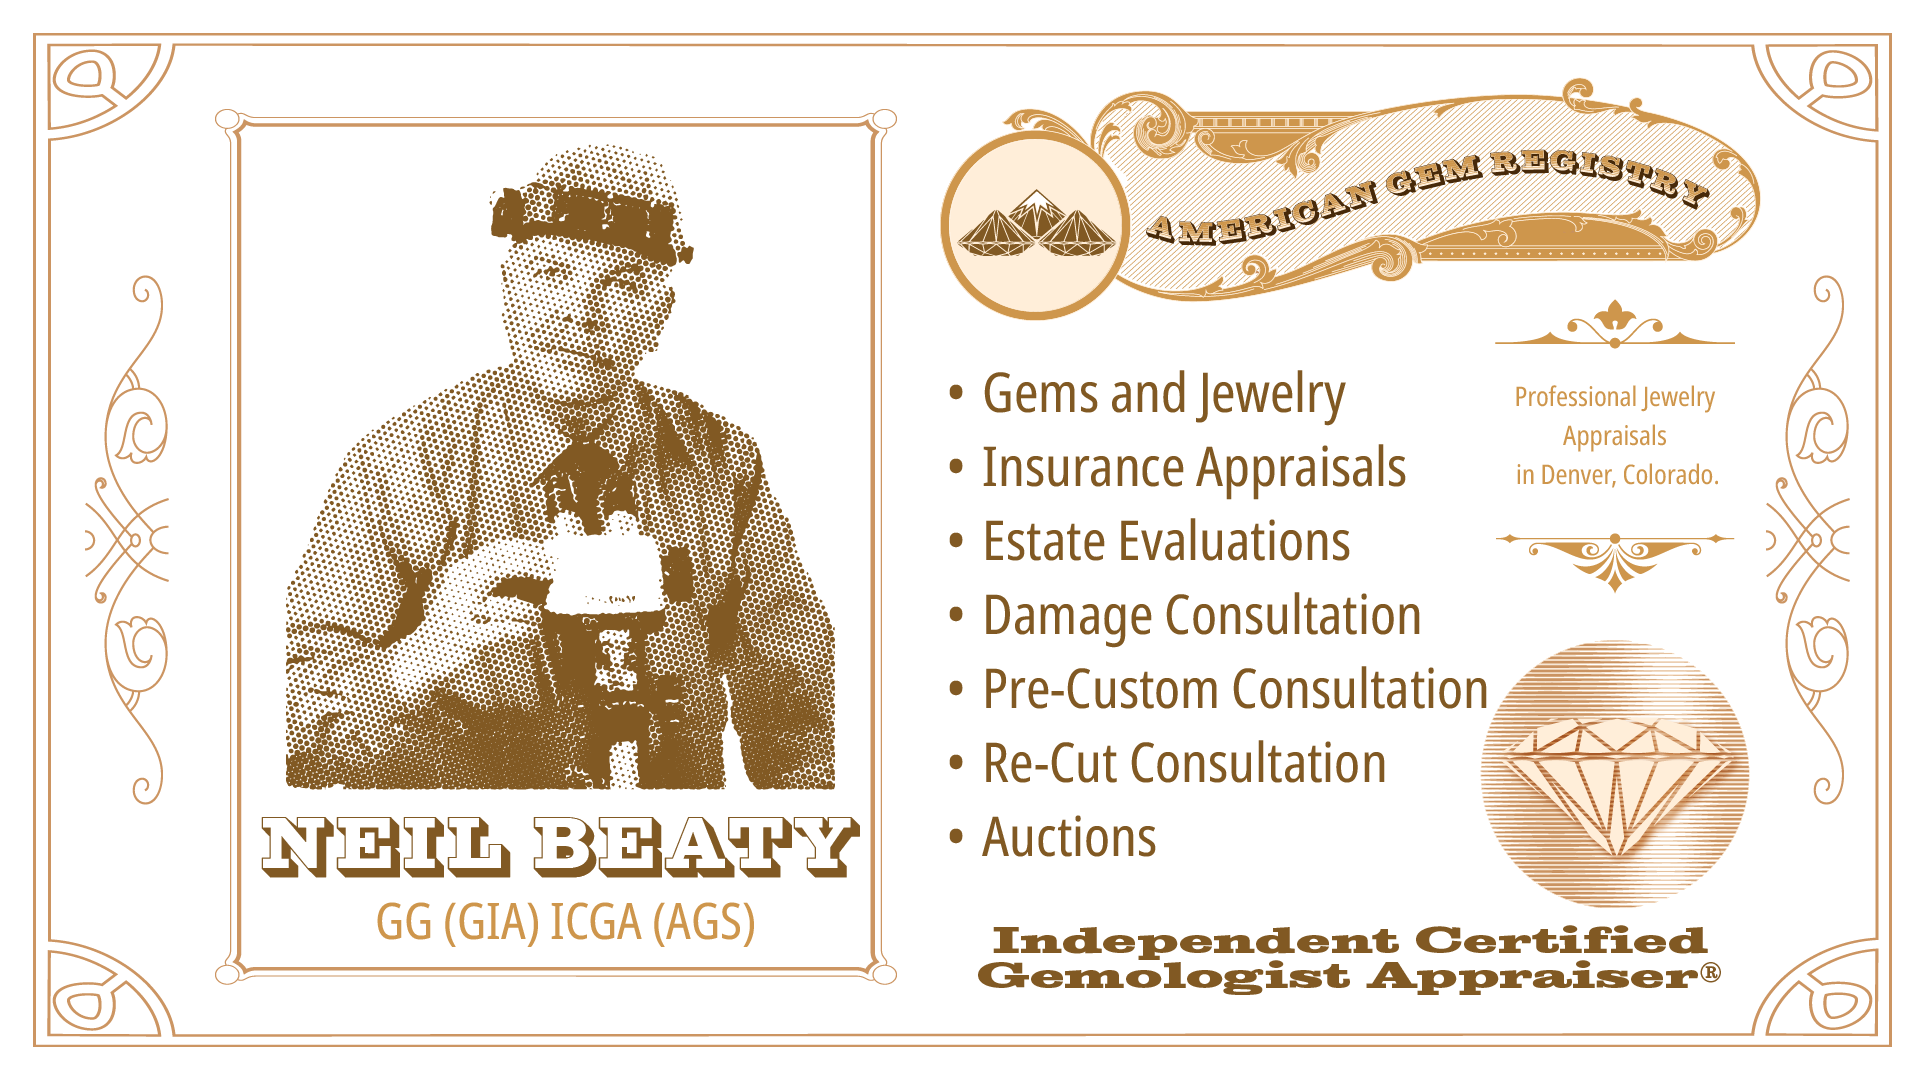 A digital advertisement that depicts a cute picture of the American Gem Registry's Neil Beaty, and lists many of the company's services. 